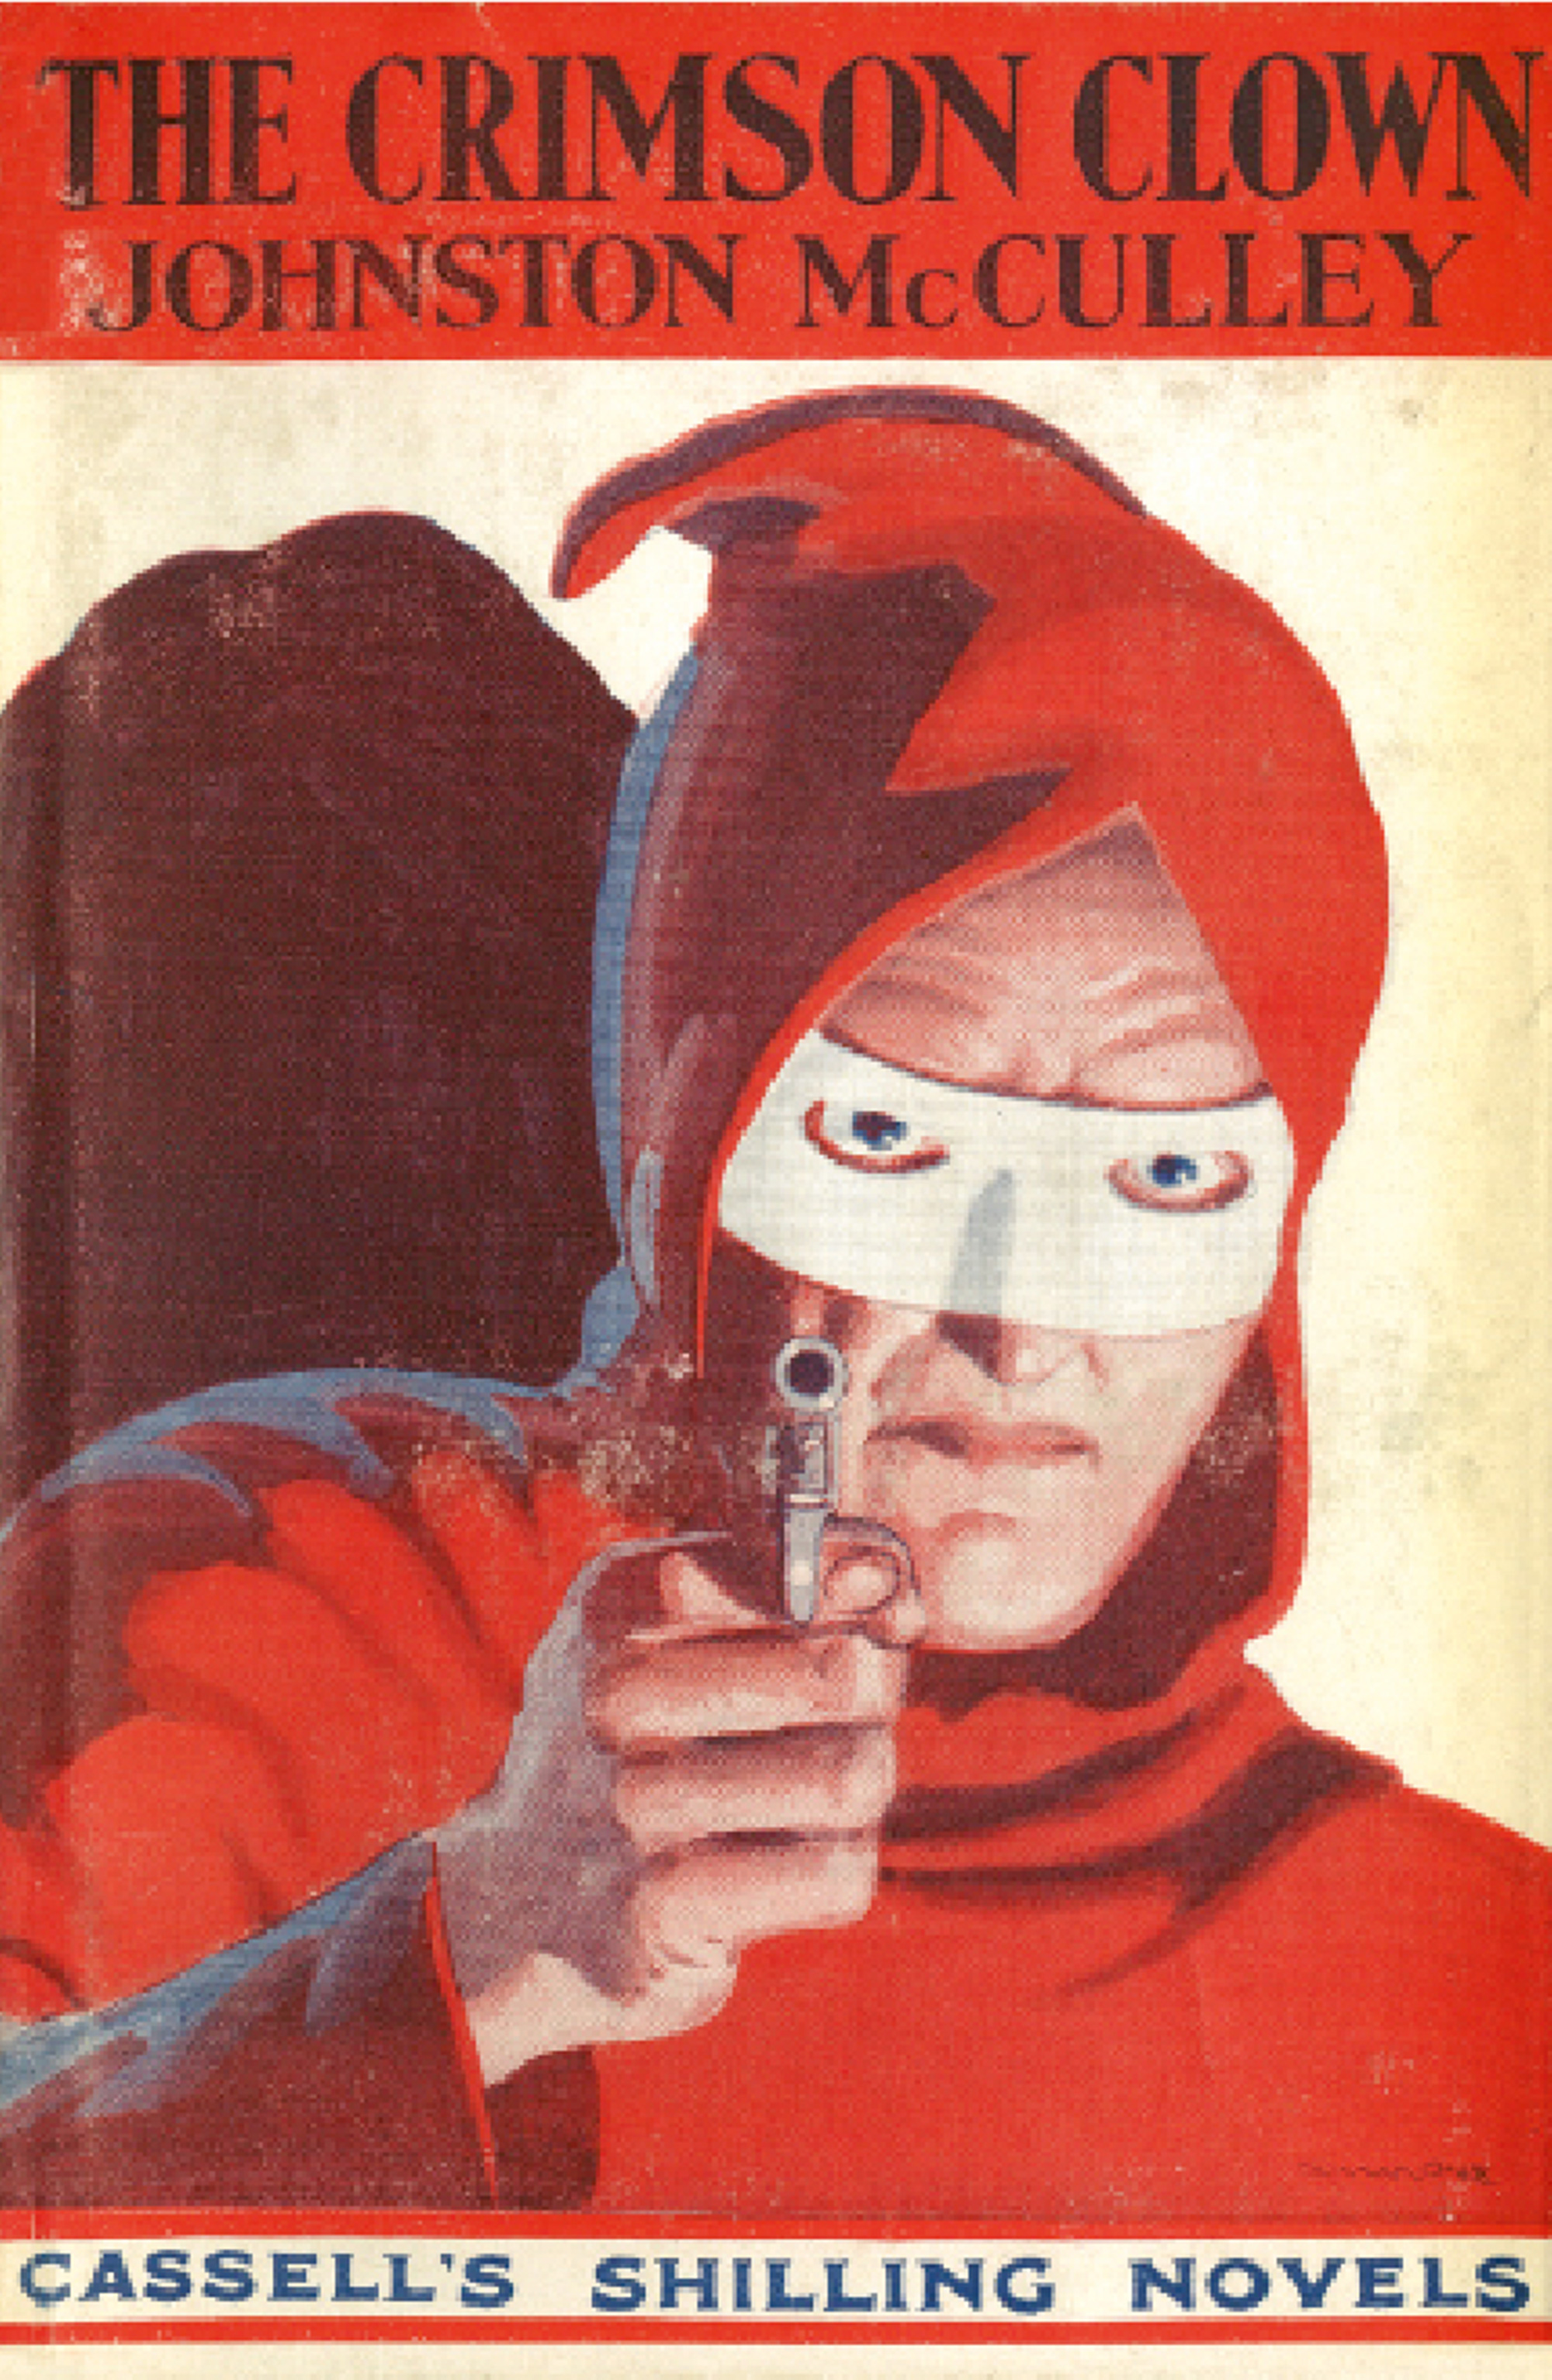 The cover of a nineteen thirty-one edition of Johnston McCulley’s “The Crimson Clown.”